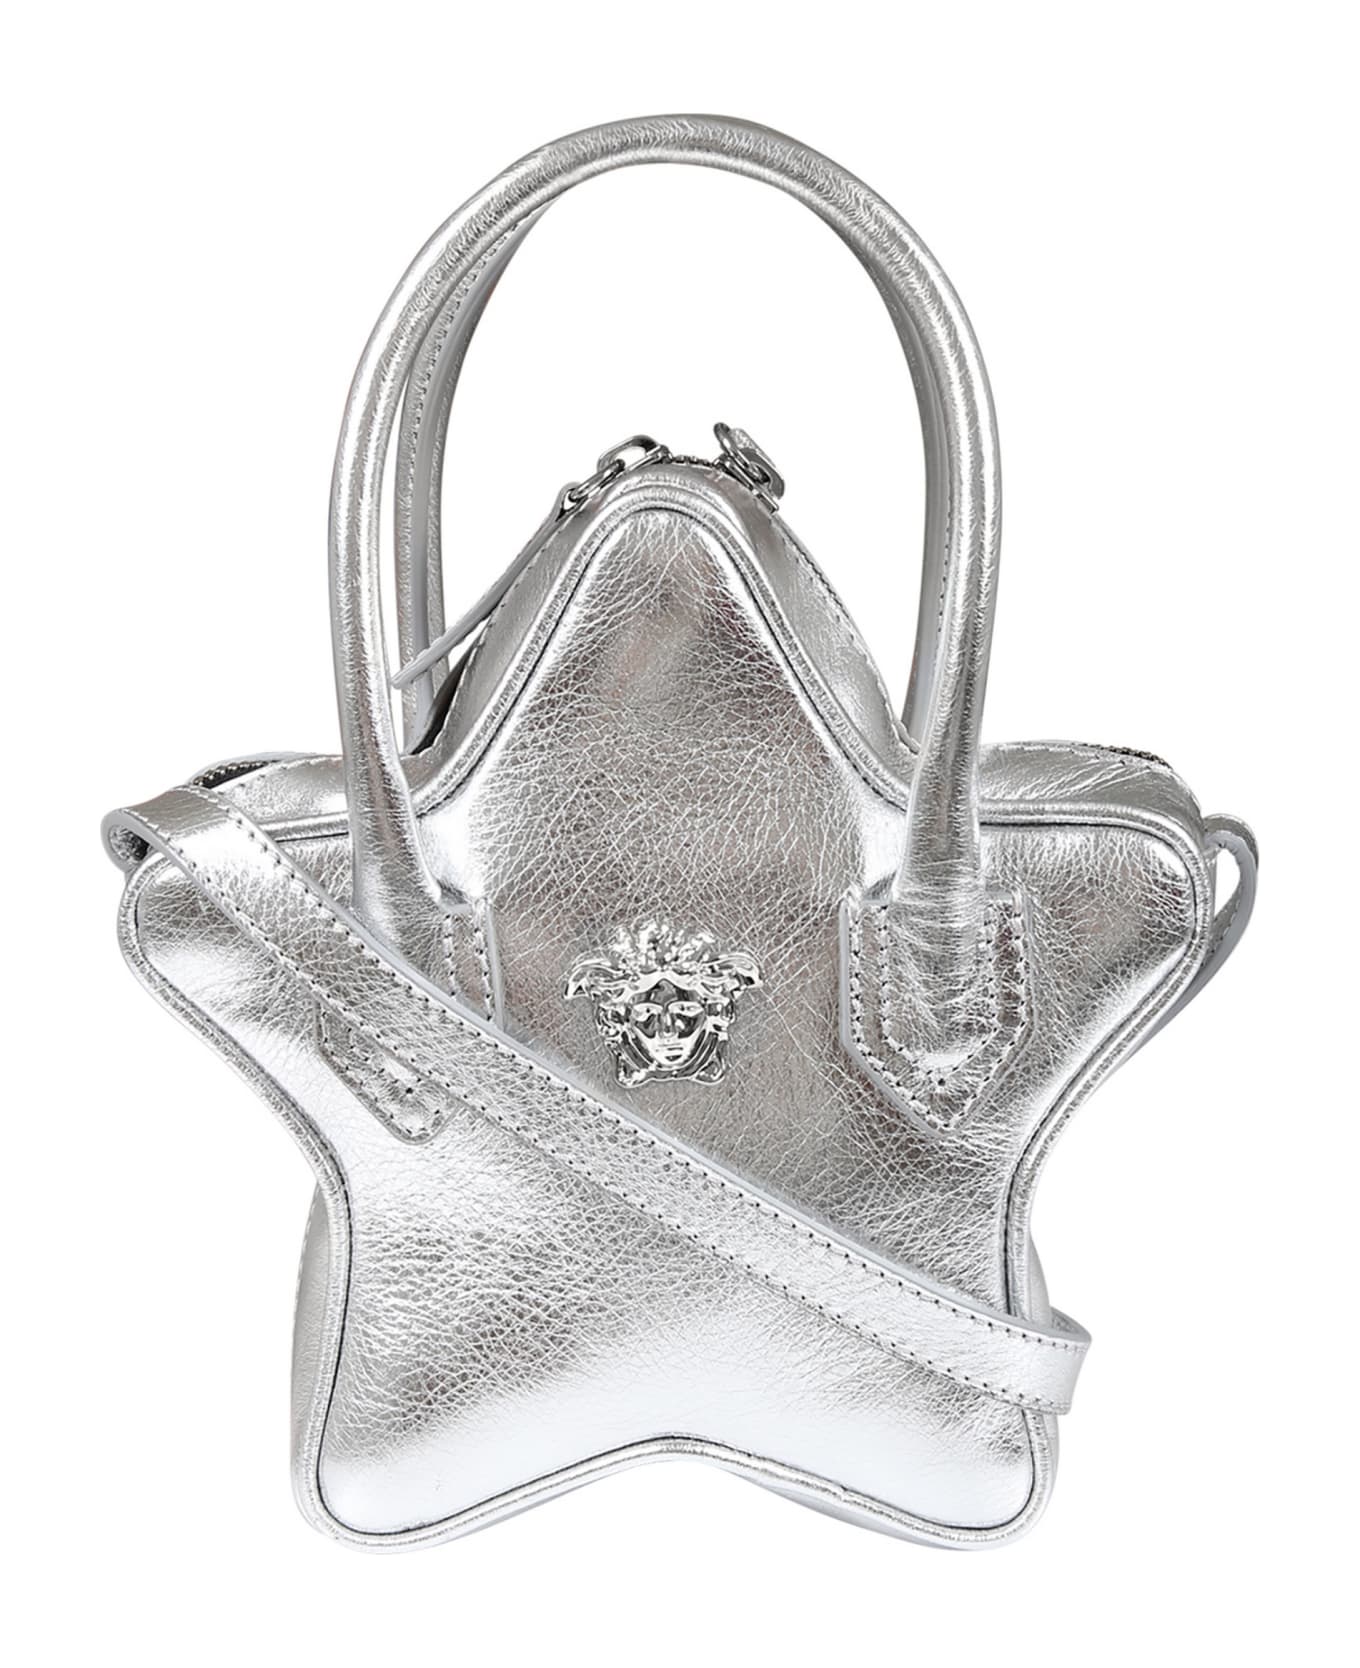 Young Versace Silver Bag For Girl With Medusa - P Argento Palladio アクセサリー＆ギフト